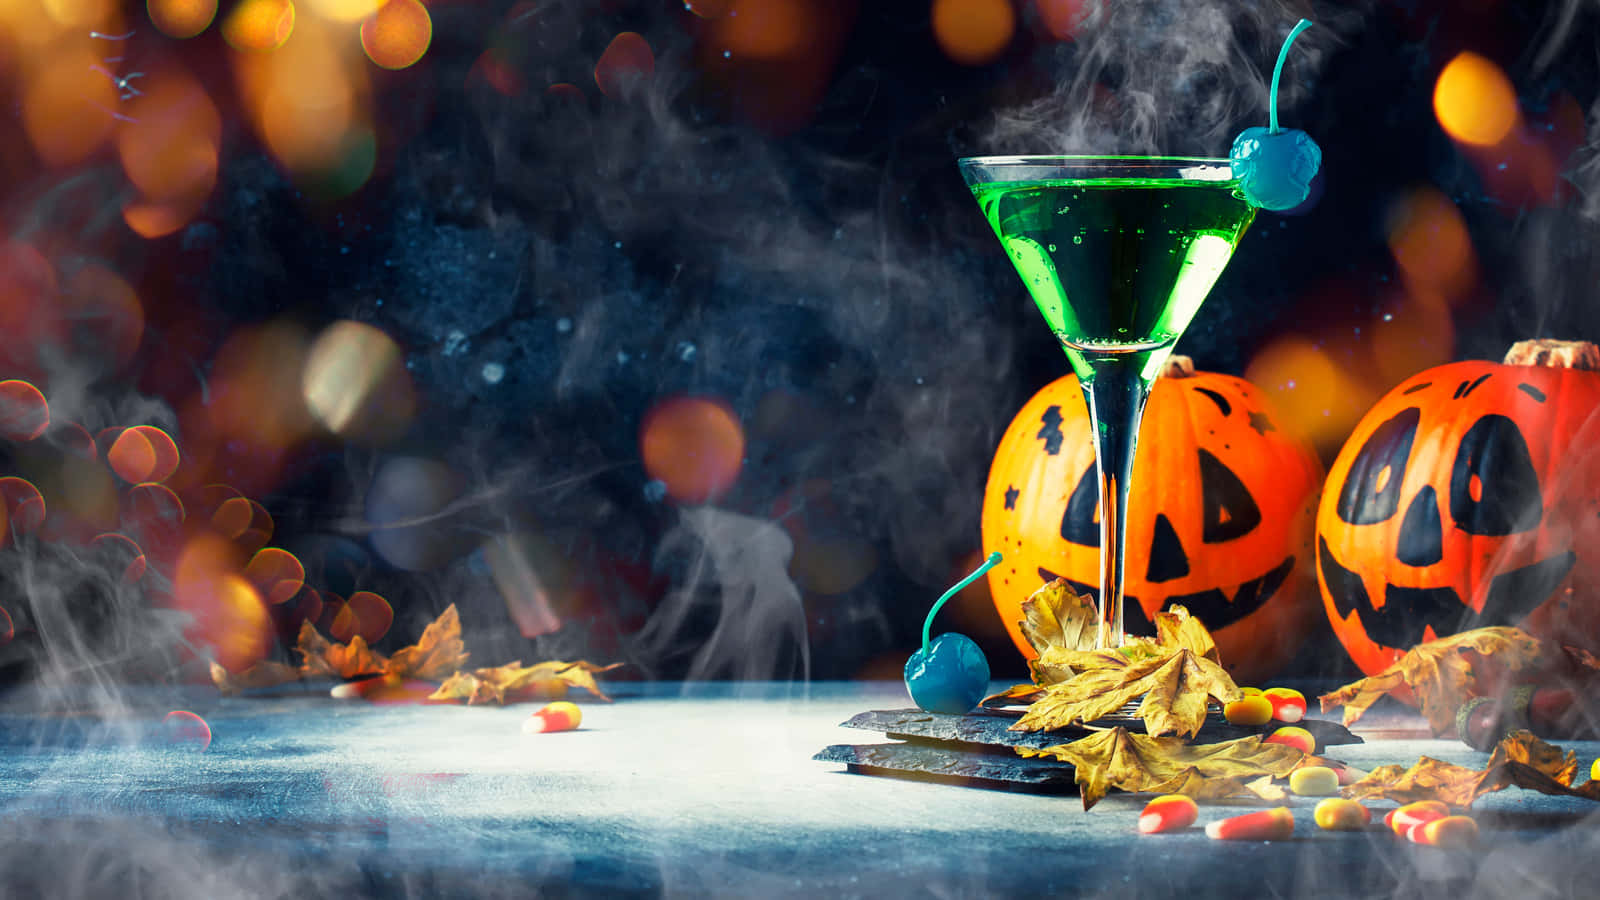 Enjoy a BOOtiful night with a spooky yet tasty Halloween cocktail. Wallpaper